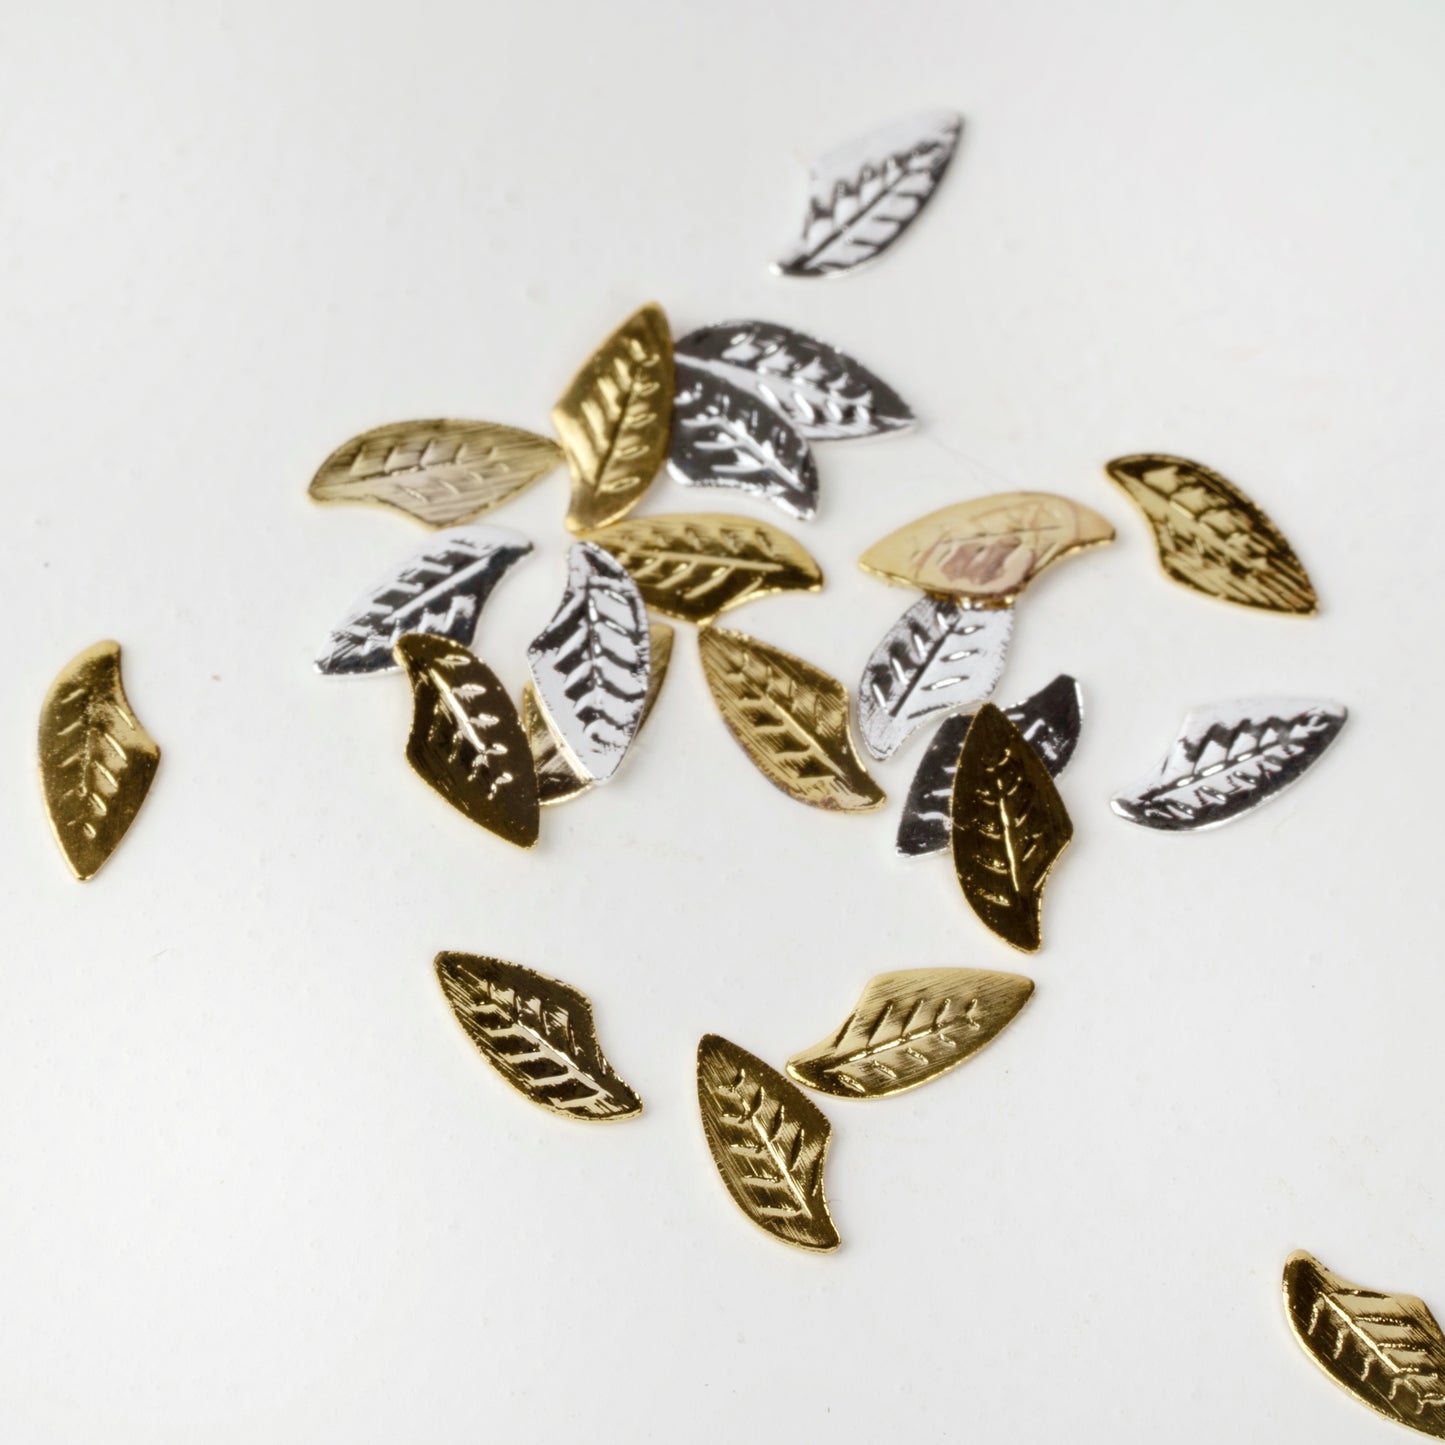 Gold and silver leaf nail charms scattered on a white background.